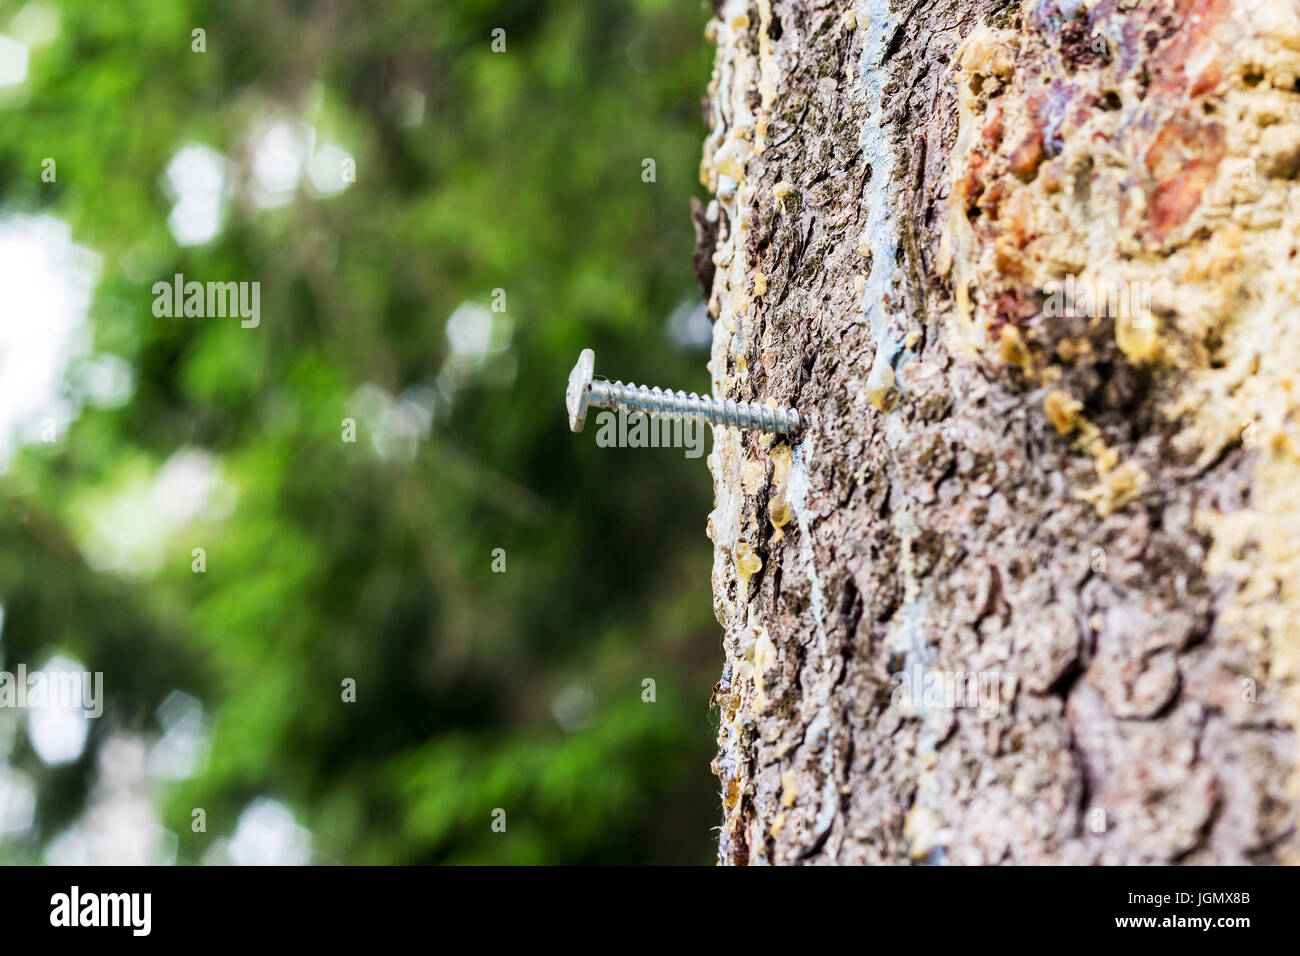 Man's crimes in the woods, a screw screwed into a living tree Stock Photo